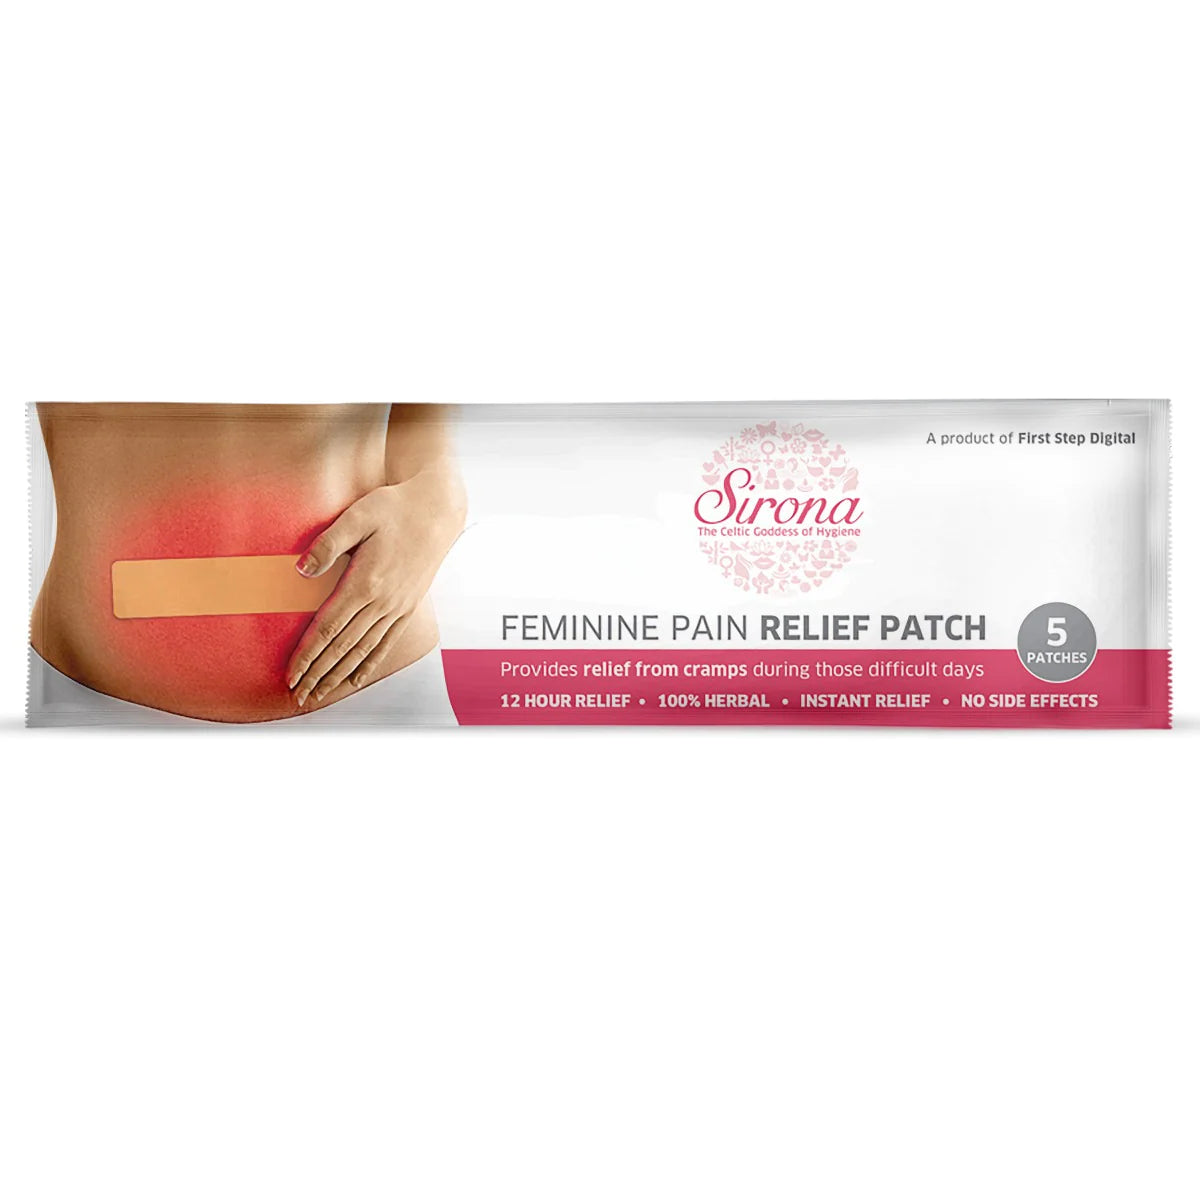 Sirona Feminine Pain Relief Patch (1 Packet of 5 patches)